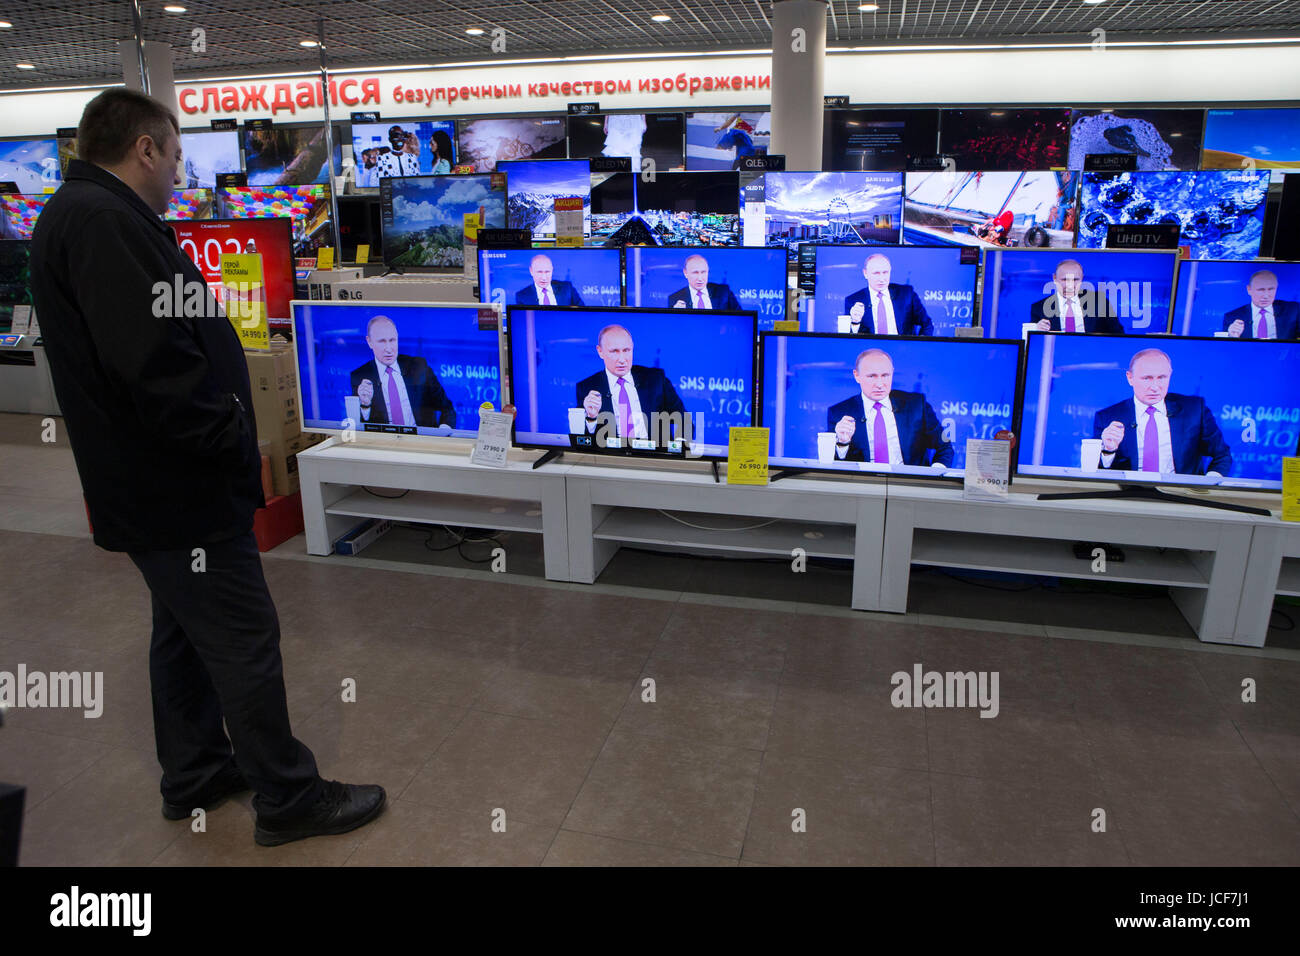 Moscow, Russia. 15th June, 2017. A customer watches TV as Russian President Vladimir Putin speaks during a televised event at a shop in Moscow, Russia, on June 15, 2017. Western sanctions on Russia have had only a limited effect and the country's economy has even partly benefited from them, Russian President Vladimir Putin said Thursday. Credit: Oleg Brusnikin/Xinhua/Alamy Live News Stock Photo